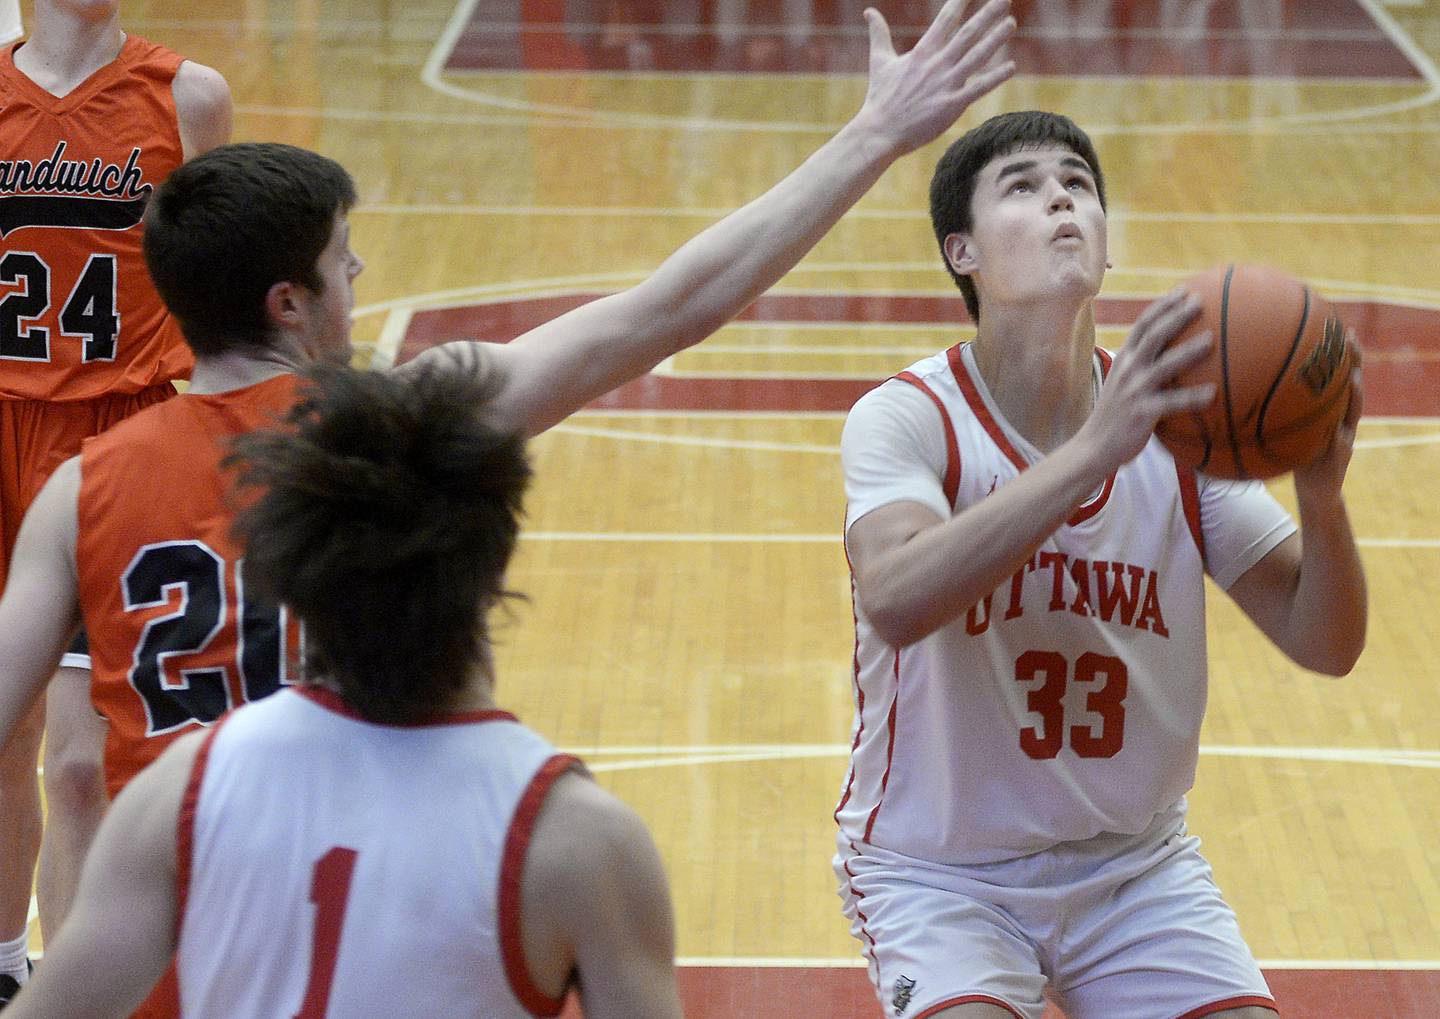 Sandwich’s Owen Shelly attempts to block as Ottawa’s Cooper Knoll eyes the basket in the first period on Tuesday, Jan. 3, 2023 at Ottawa High School.